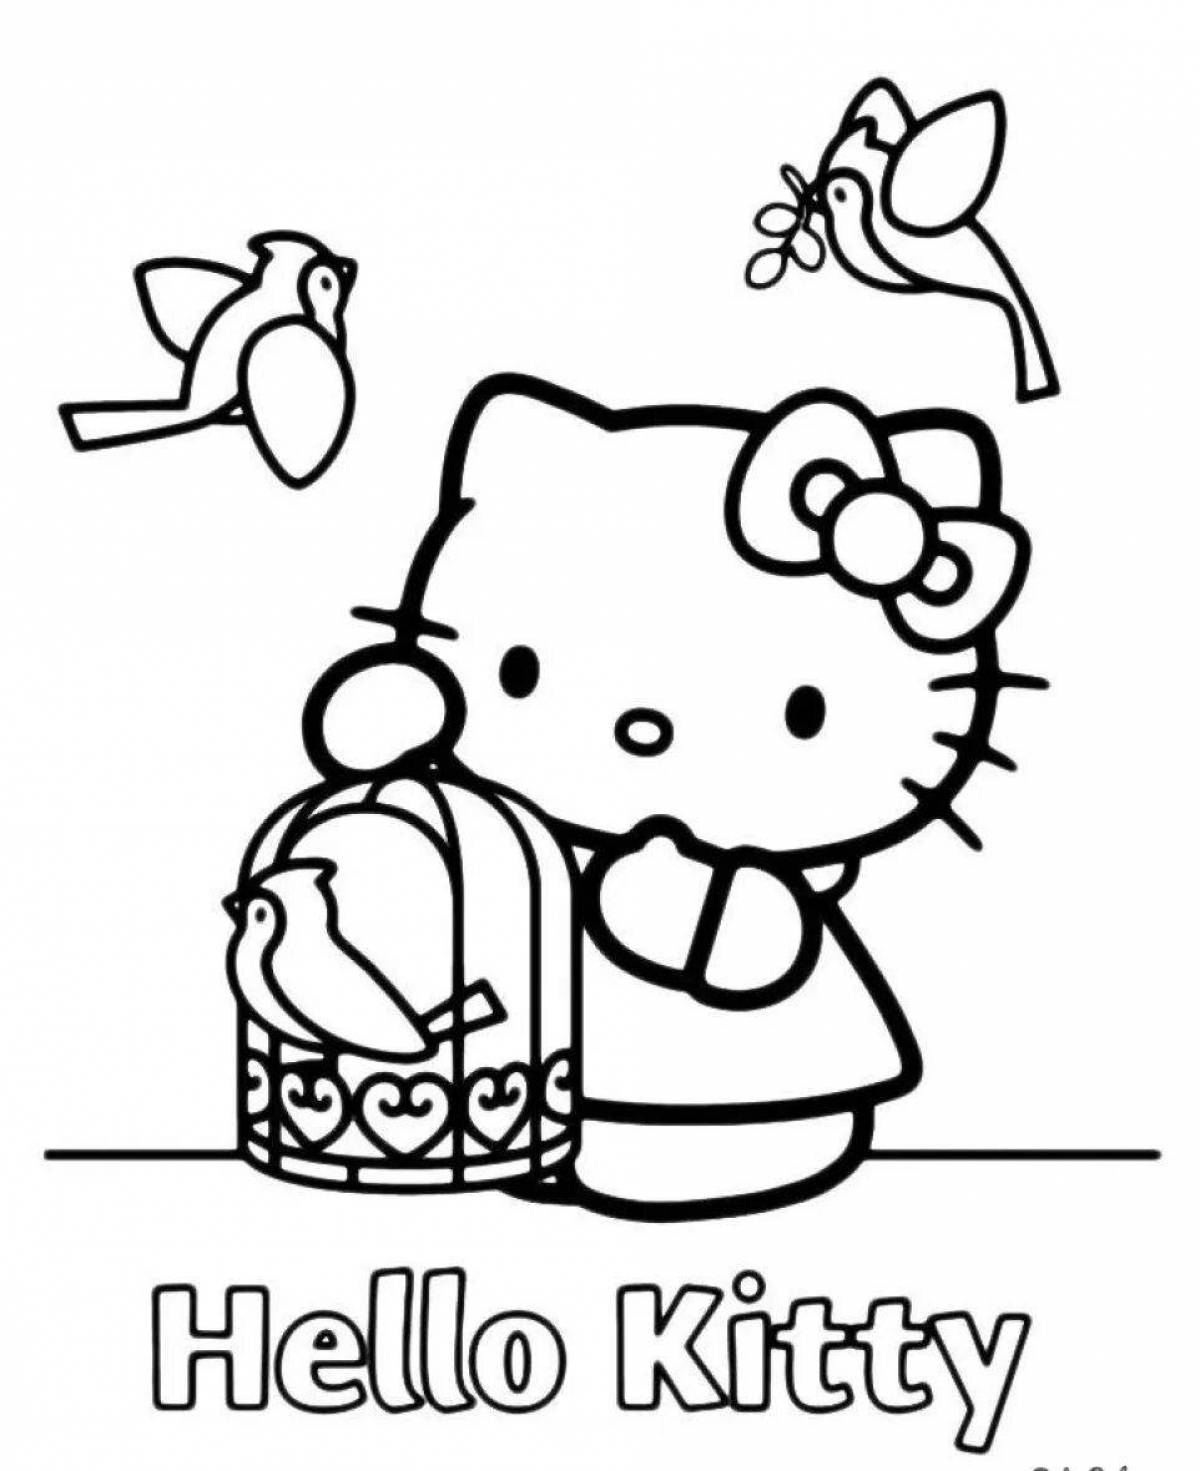 Hello kitty may exciting melody